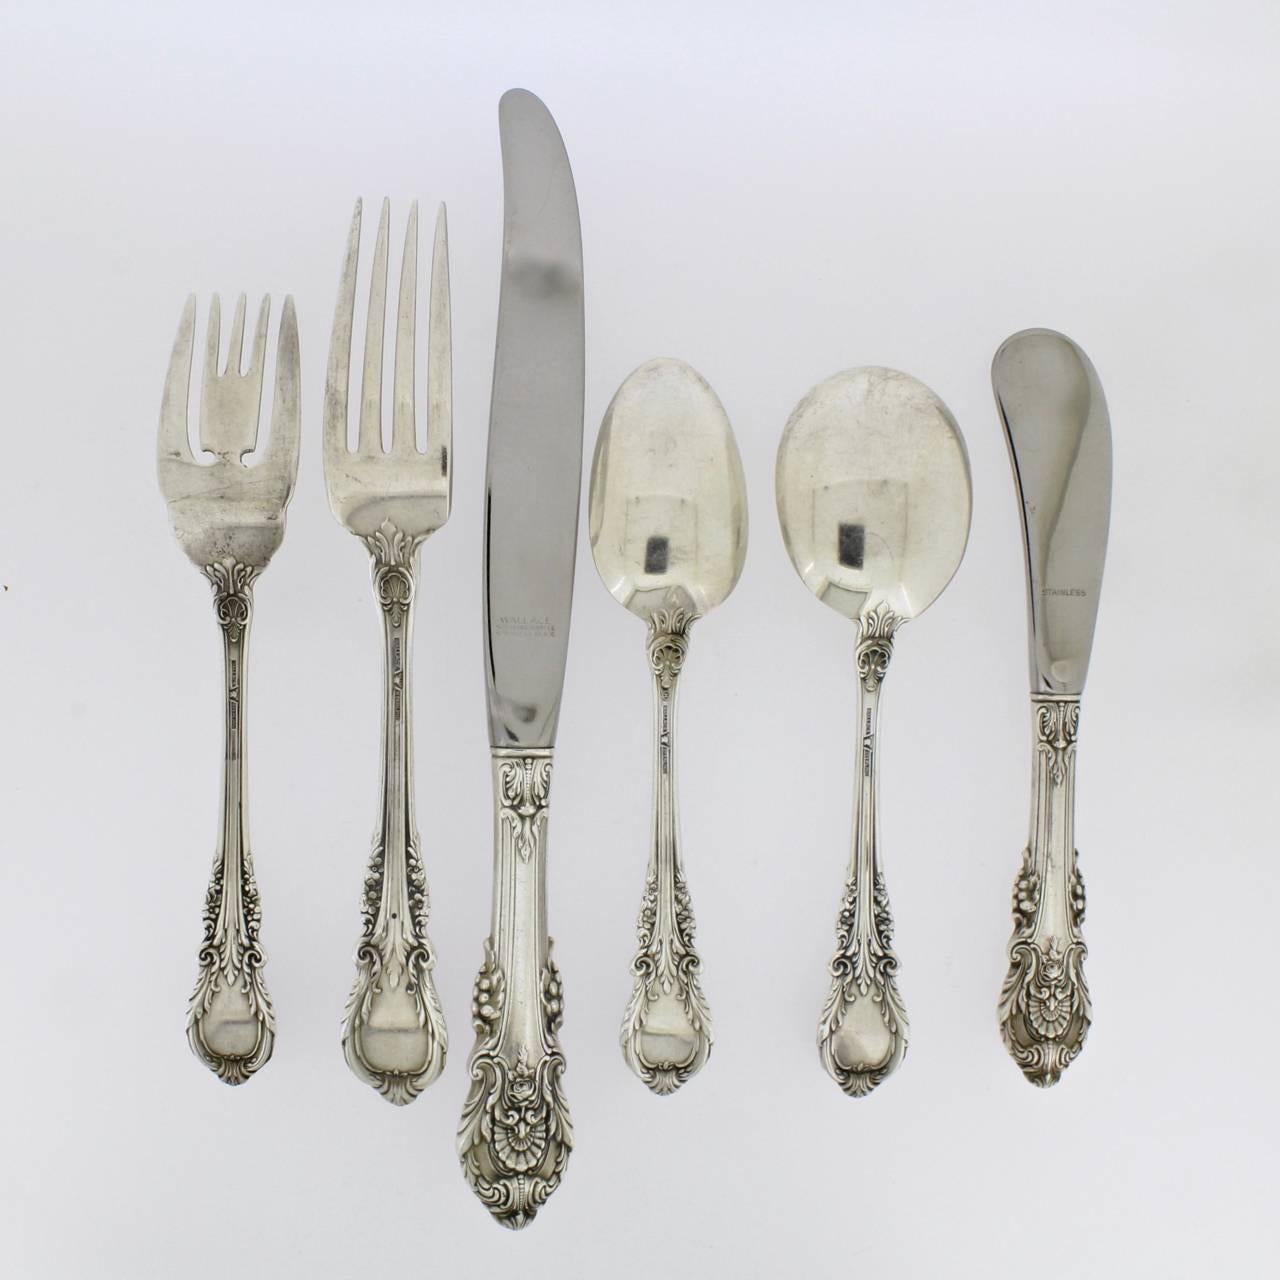 75-piece Wallace sterling silver Sir Christopher flatware set

The set includes 12 regular forks, 12 knives, 11 salad forks, 12 soup spoons, nine butter knives, 18 teaspoons, and one jelly spoon. 

The pieces are not monogrammed. 

Reverse